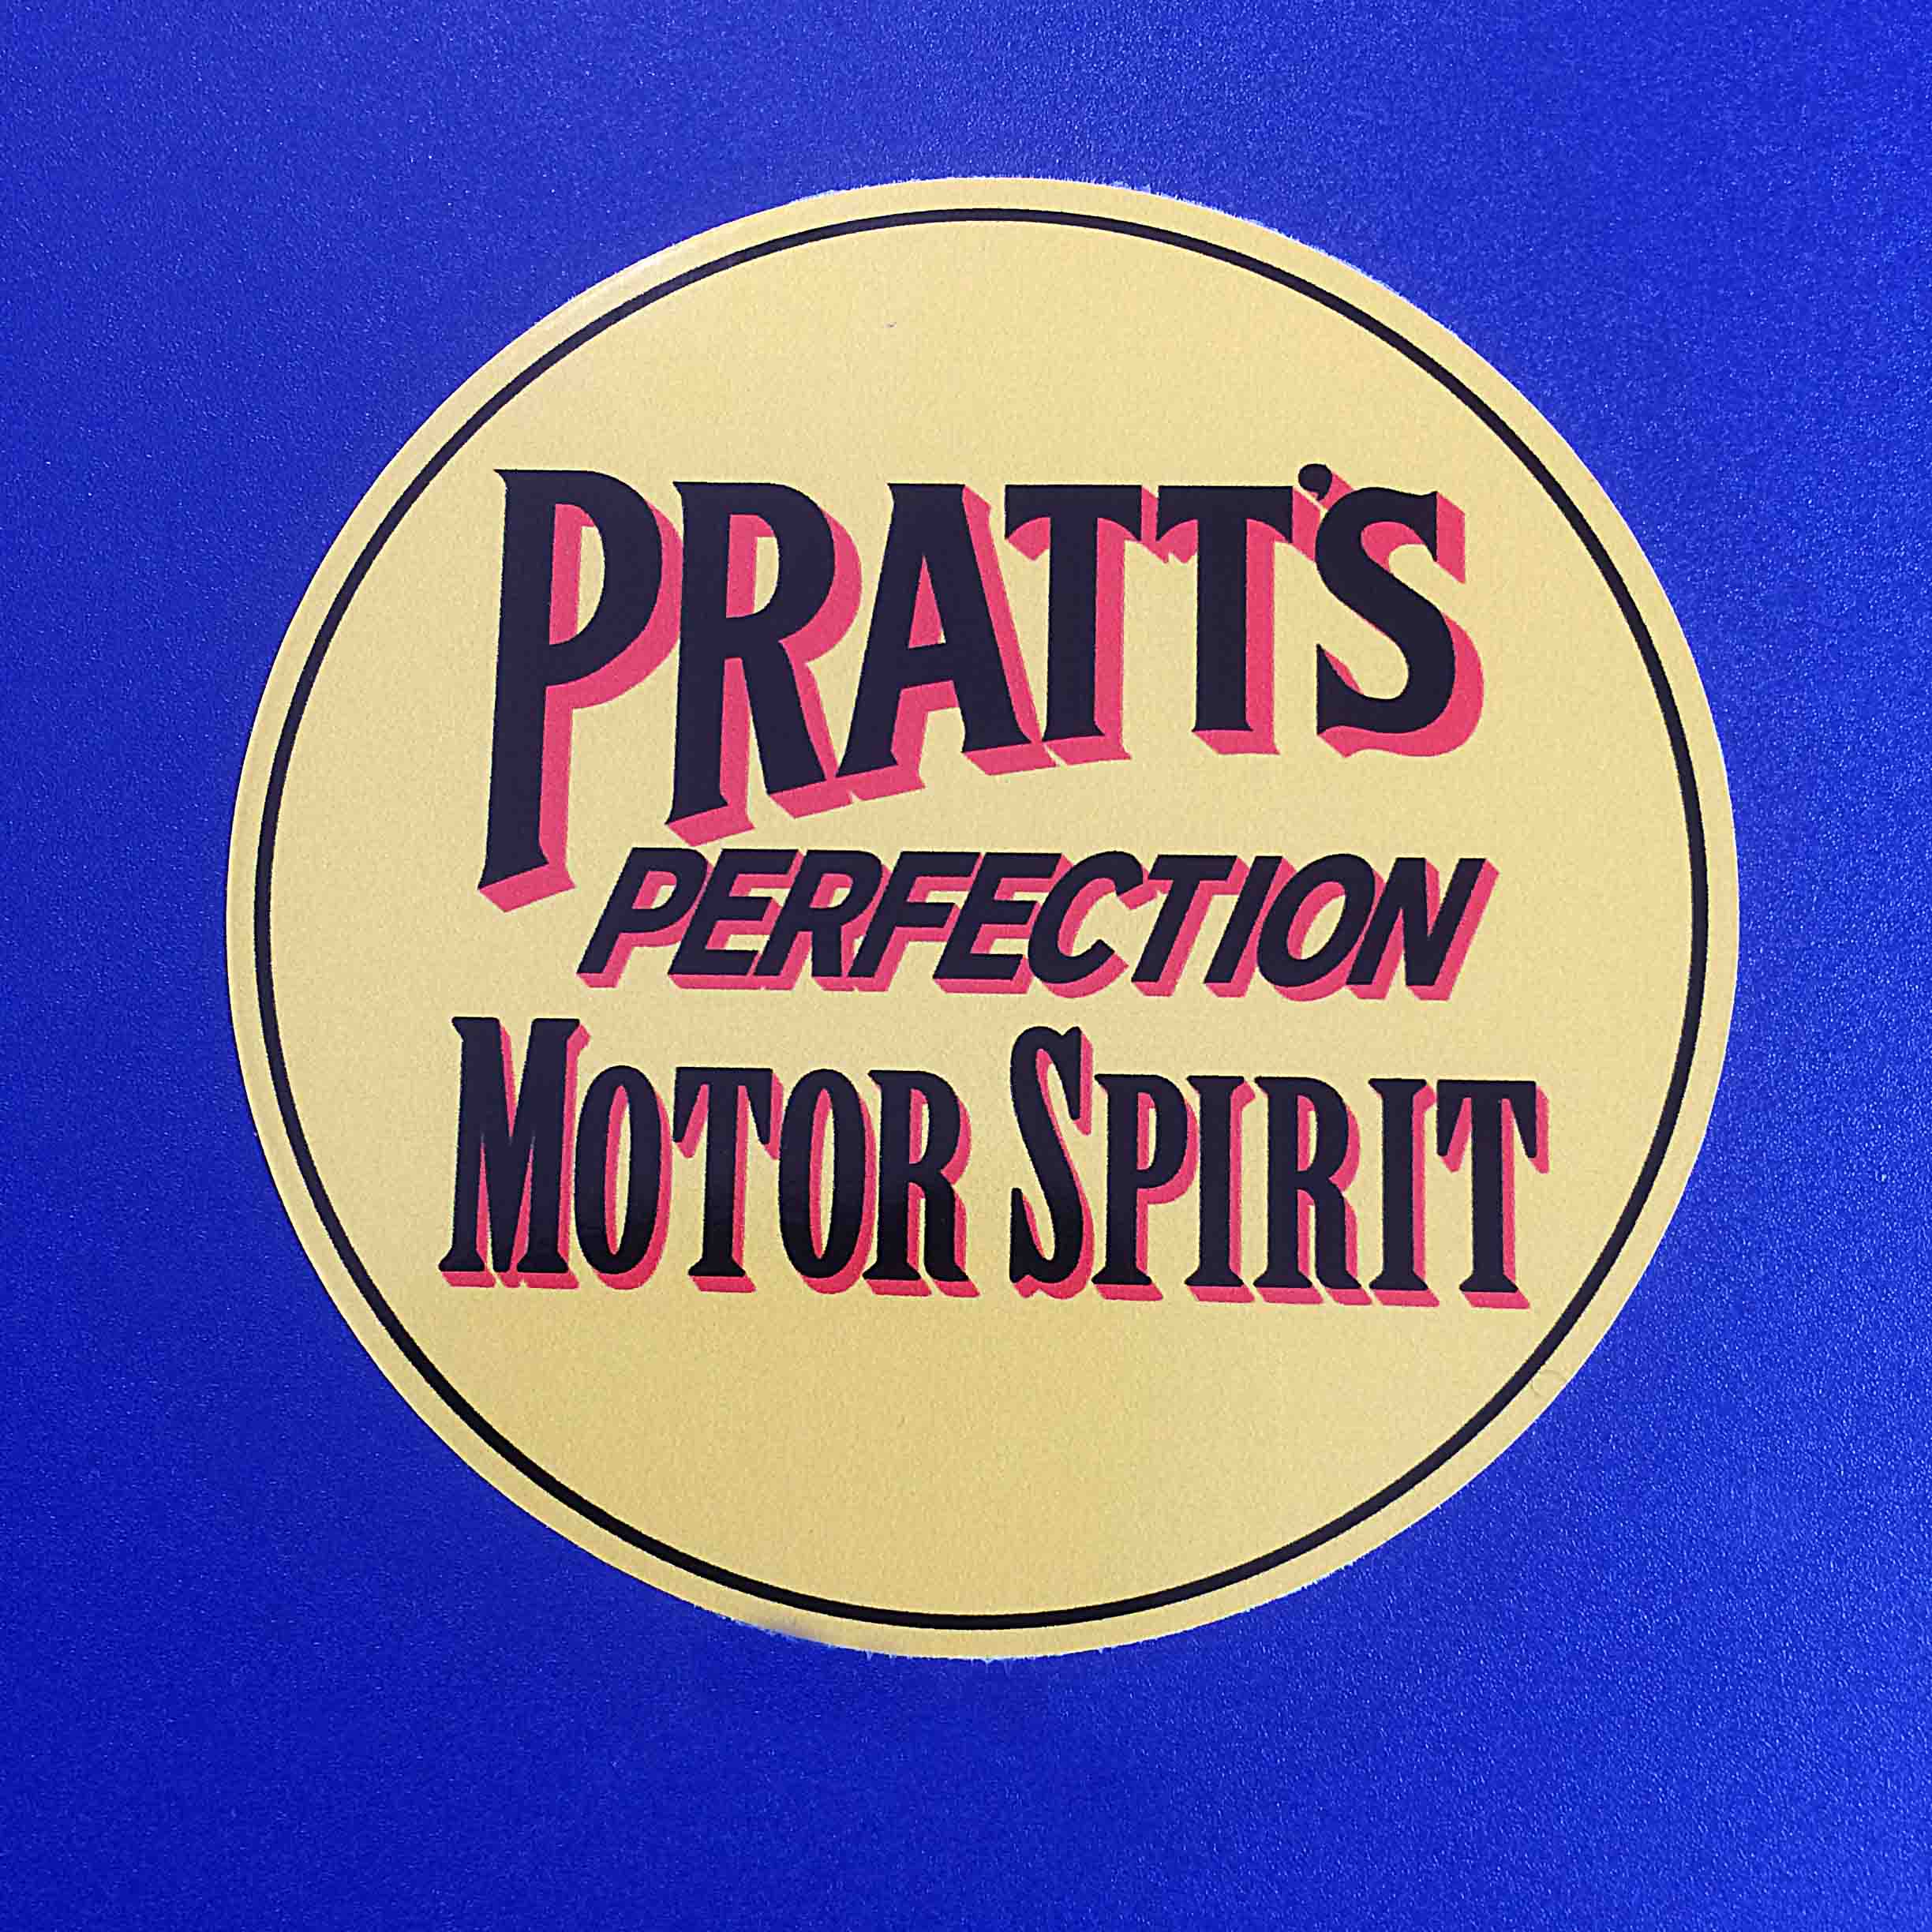 Pratt's Perfection Motor Spirit. Black/red shadow lettering on a pale yellow background.